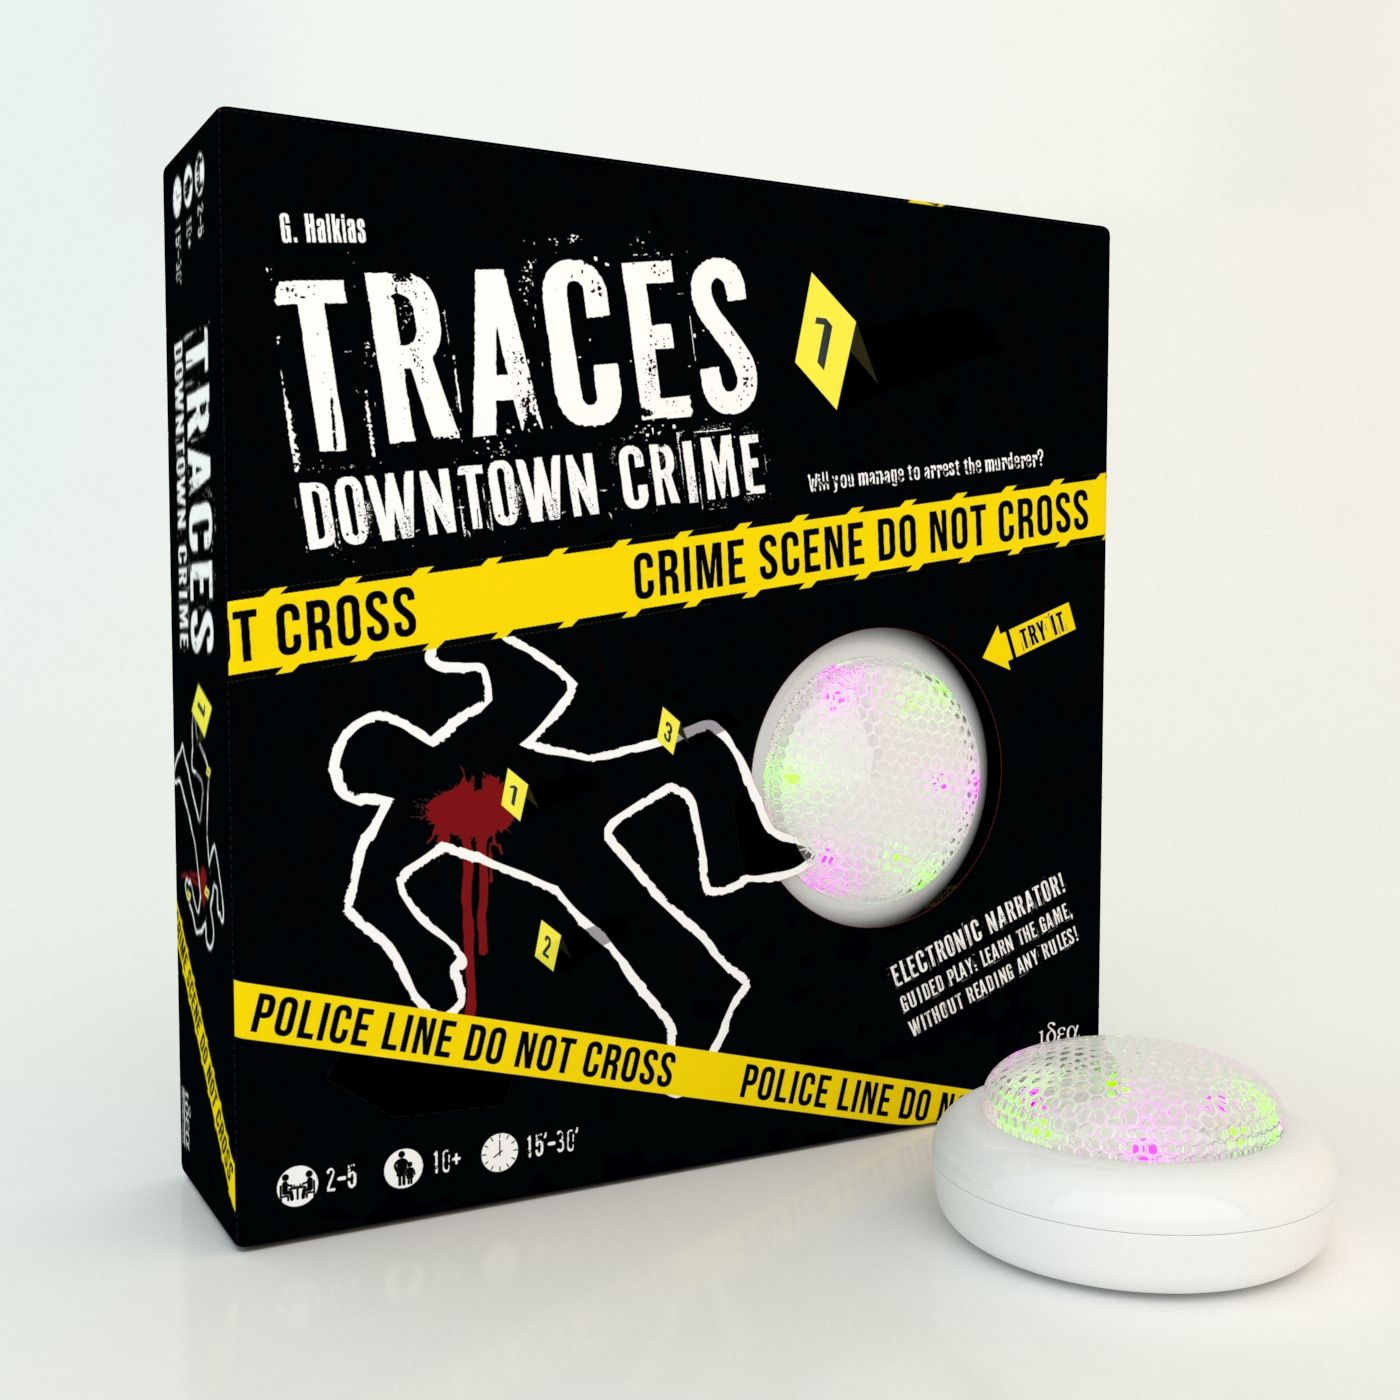 TRACES: Downtown Crime